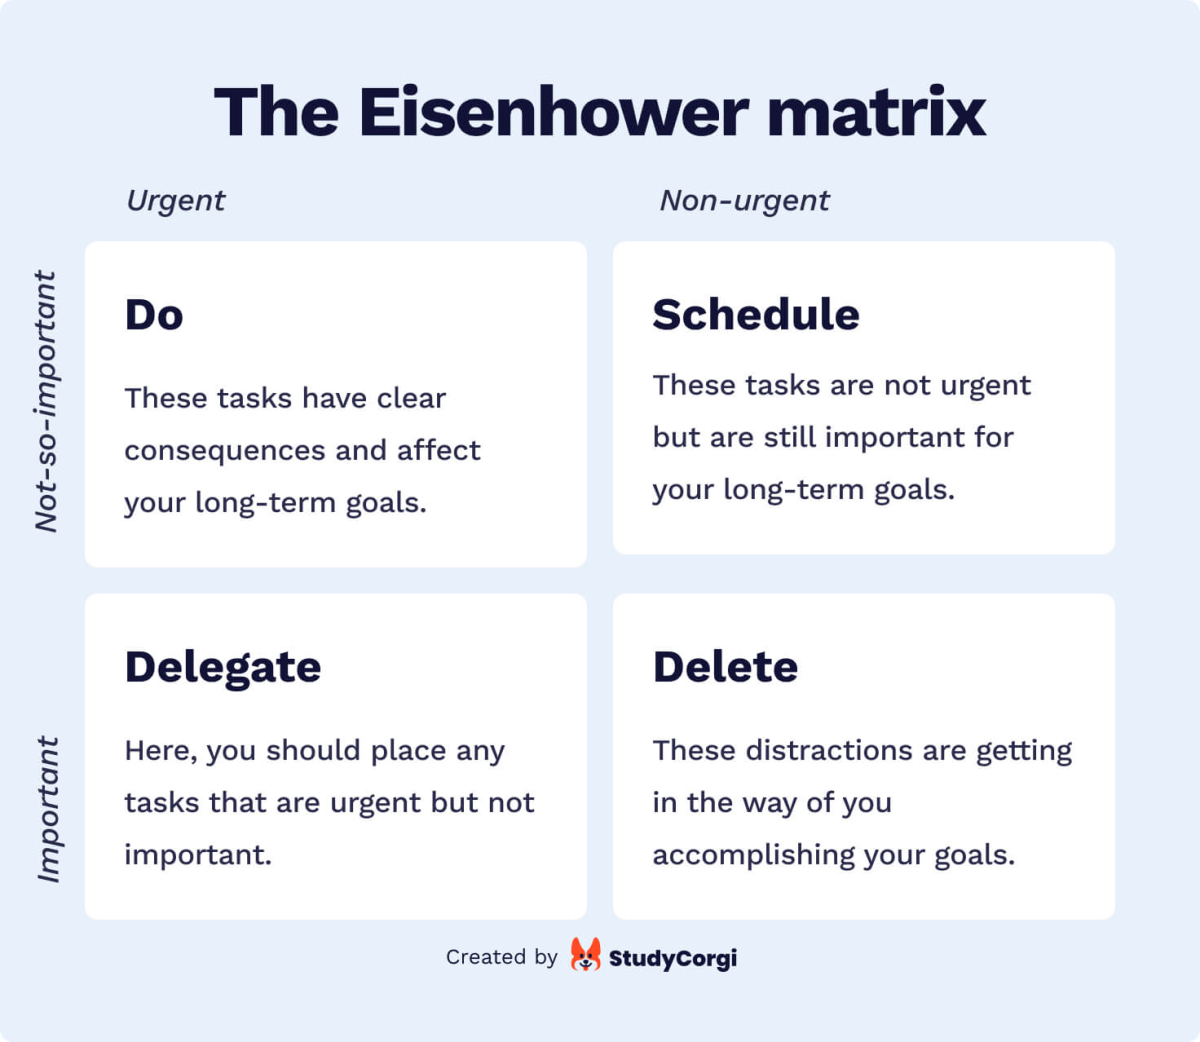 The picture displays the Eisenhower matrix.